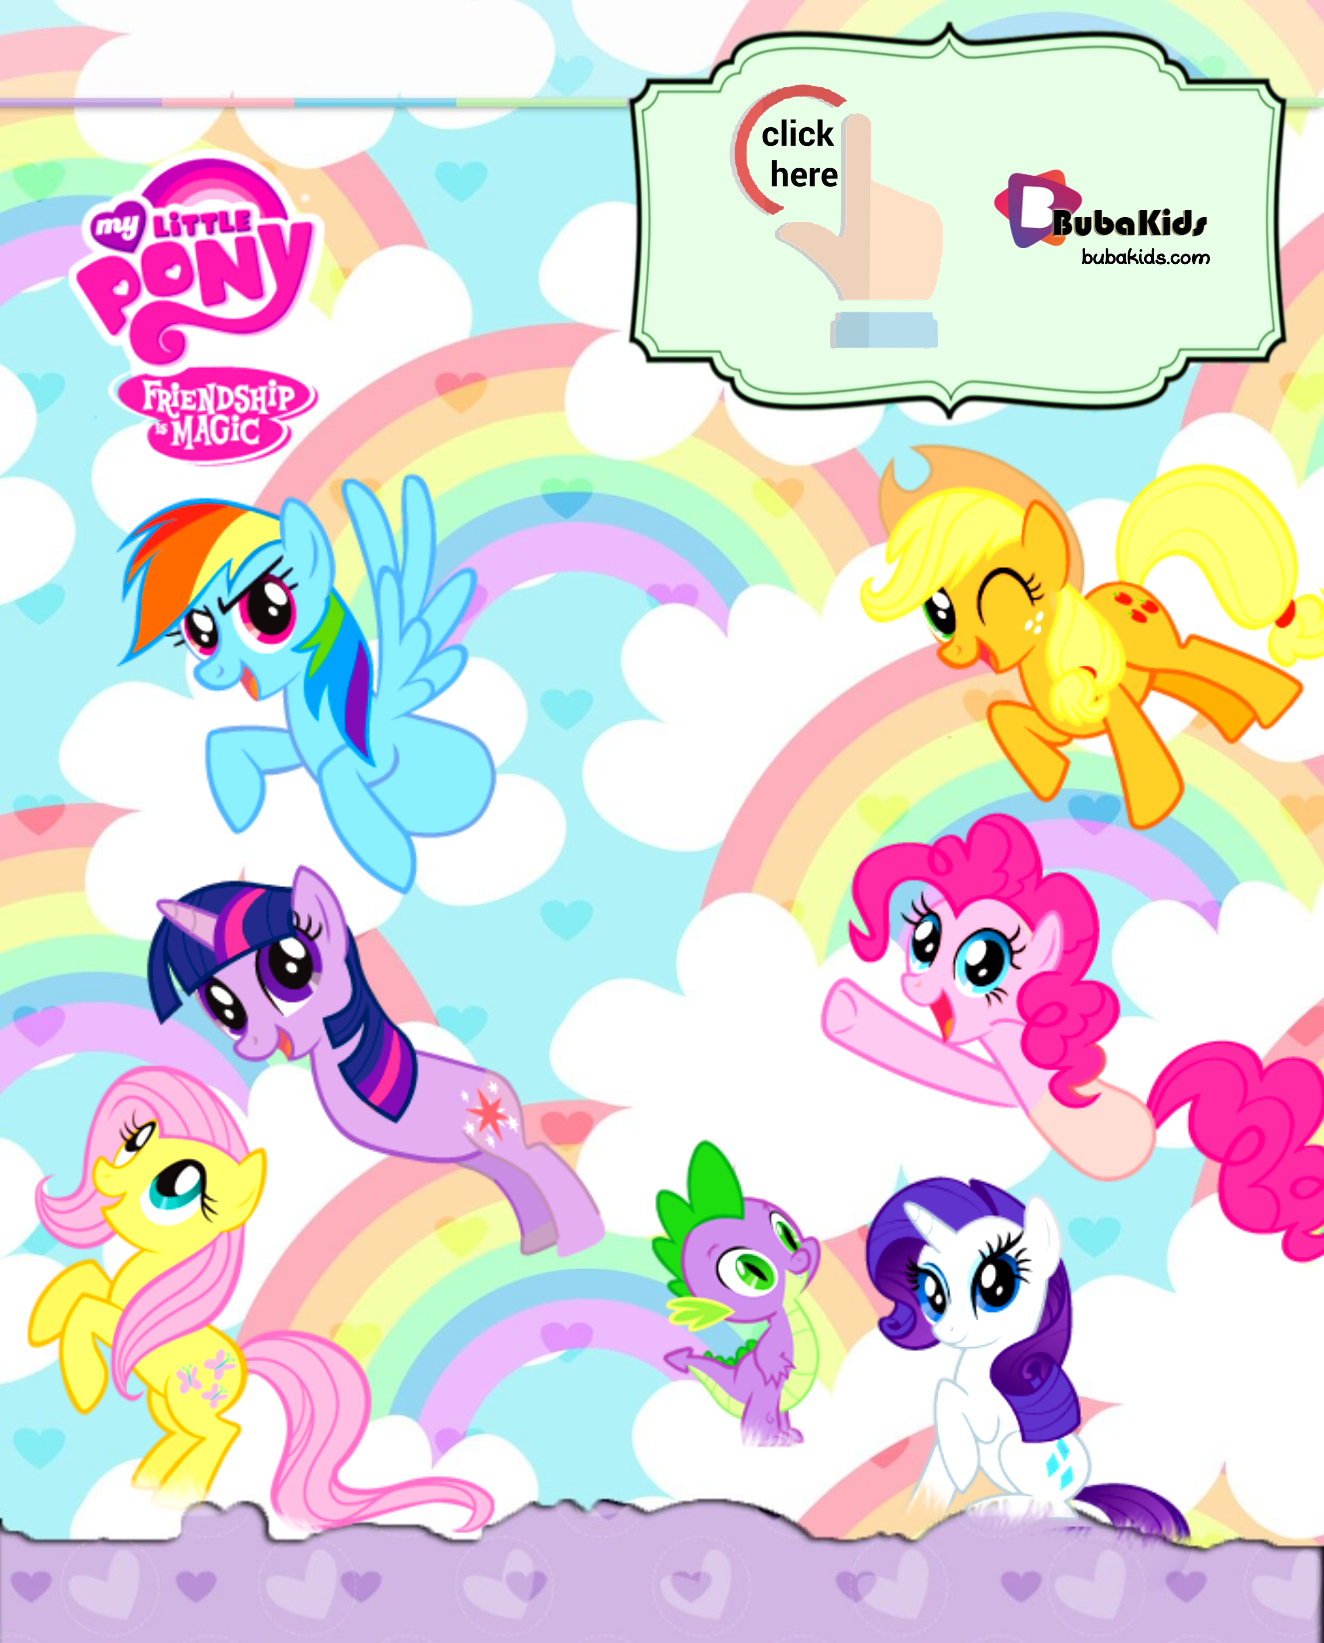 My little pony free invitation card template. Wallpaper